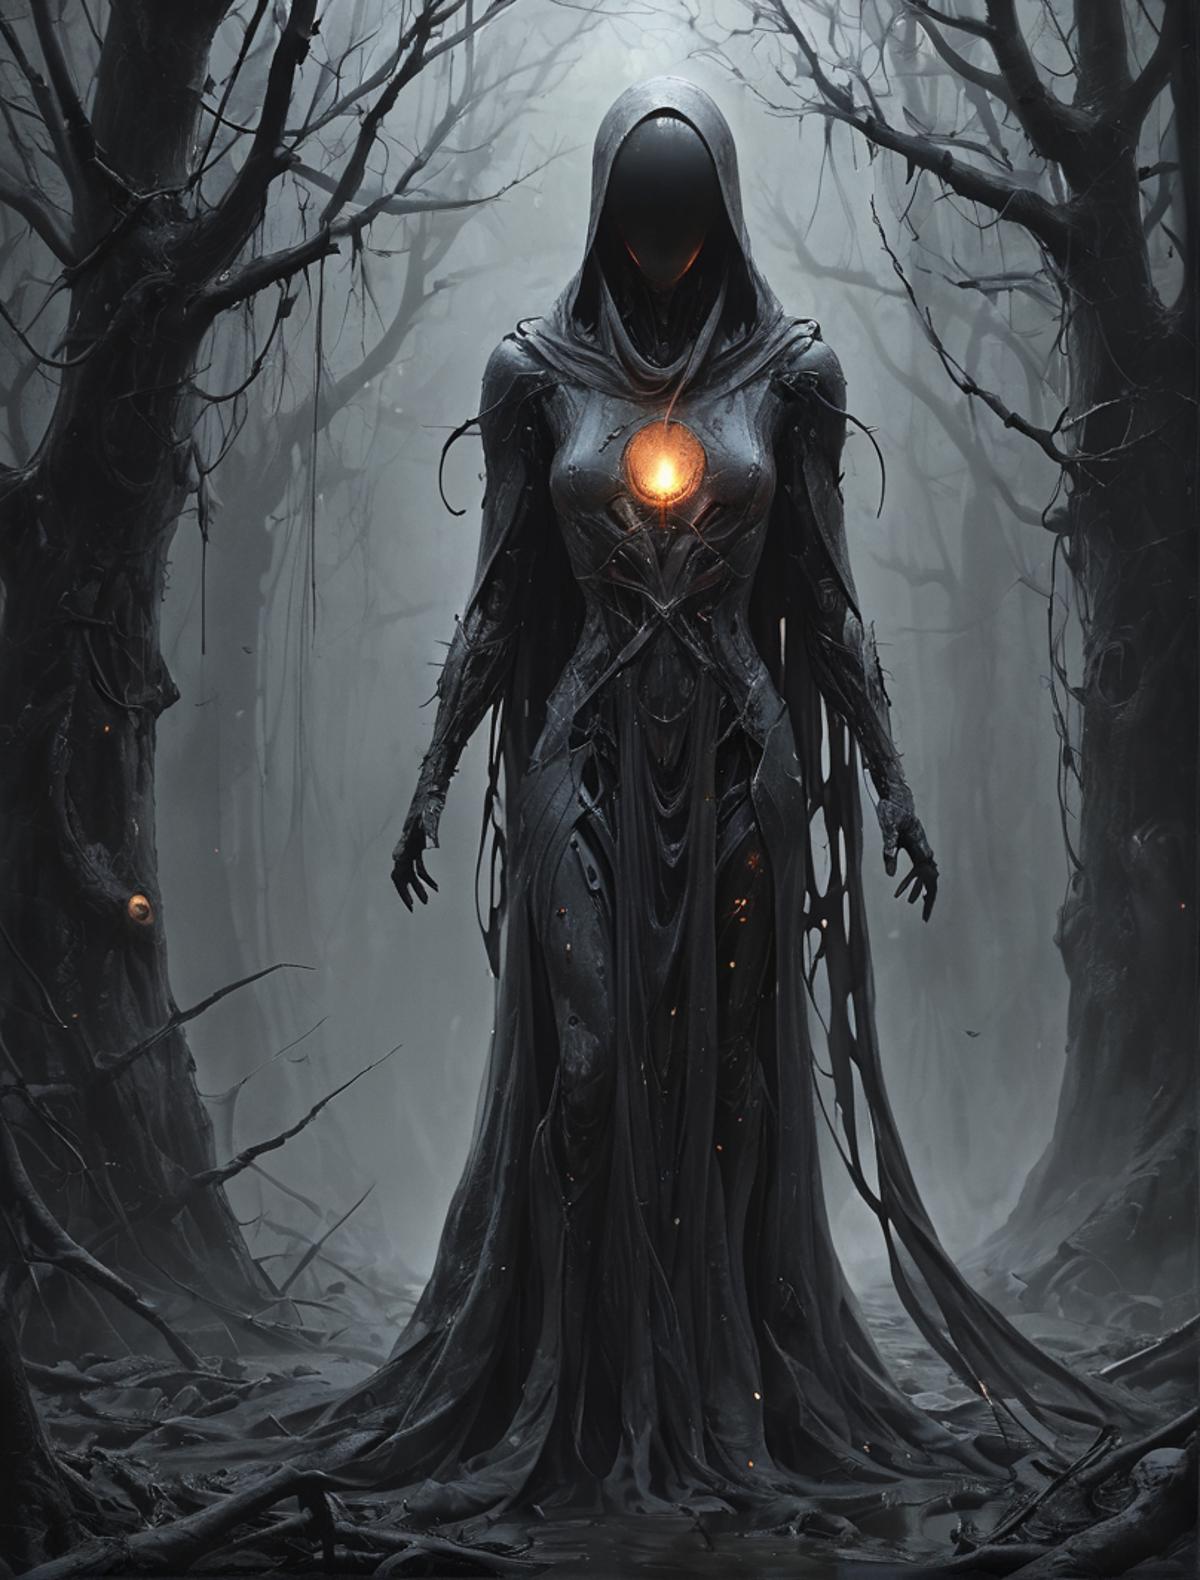 A woman in a black dress stands in a dark forest, with a heart on her chest.